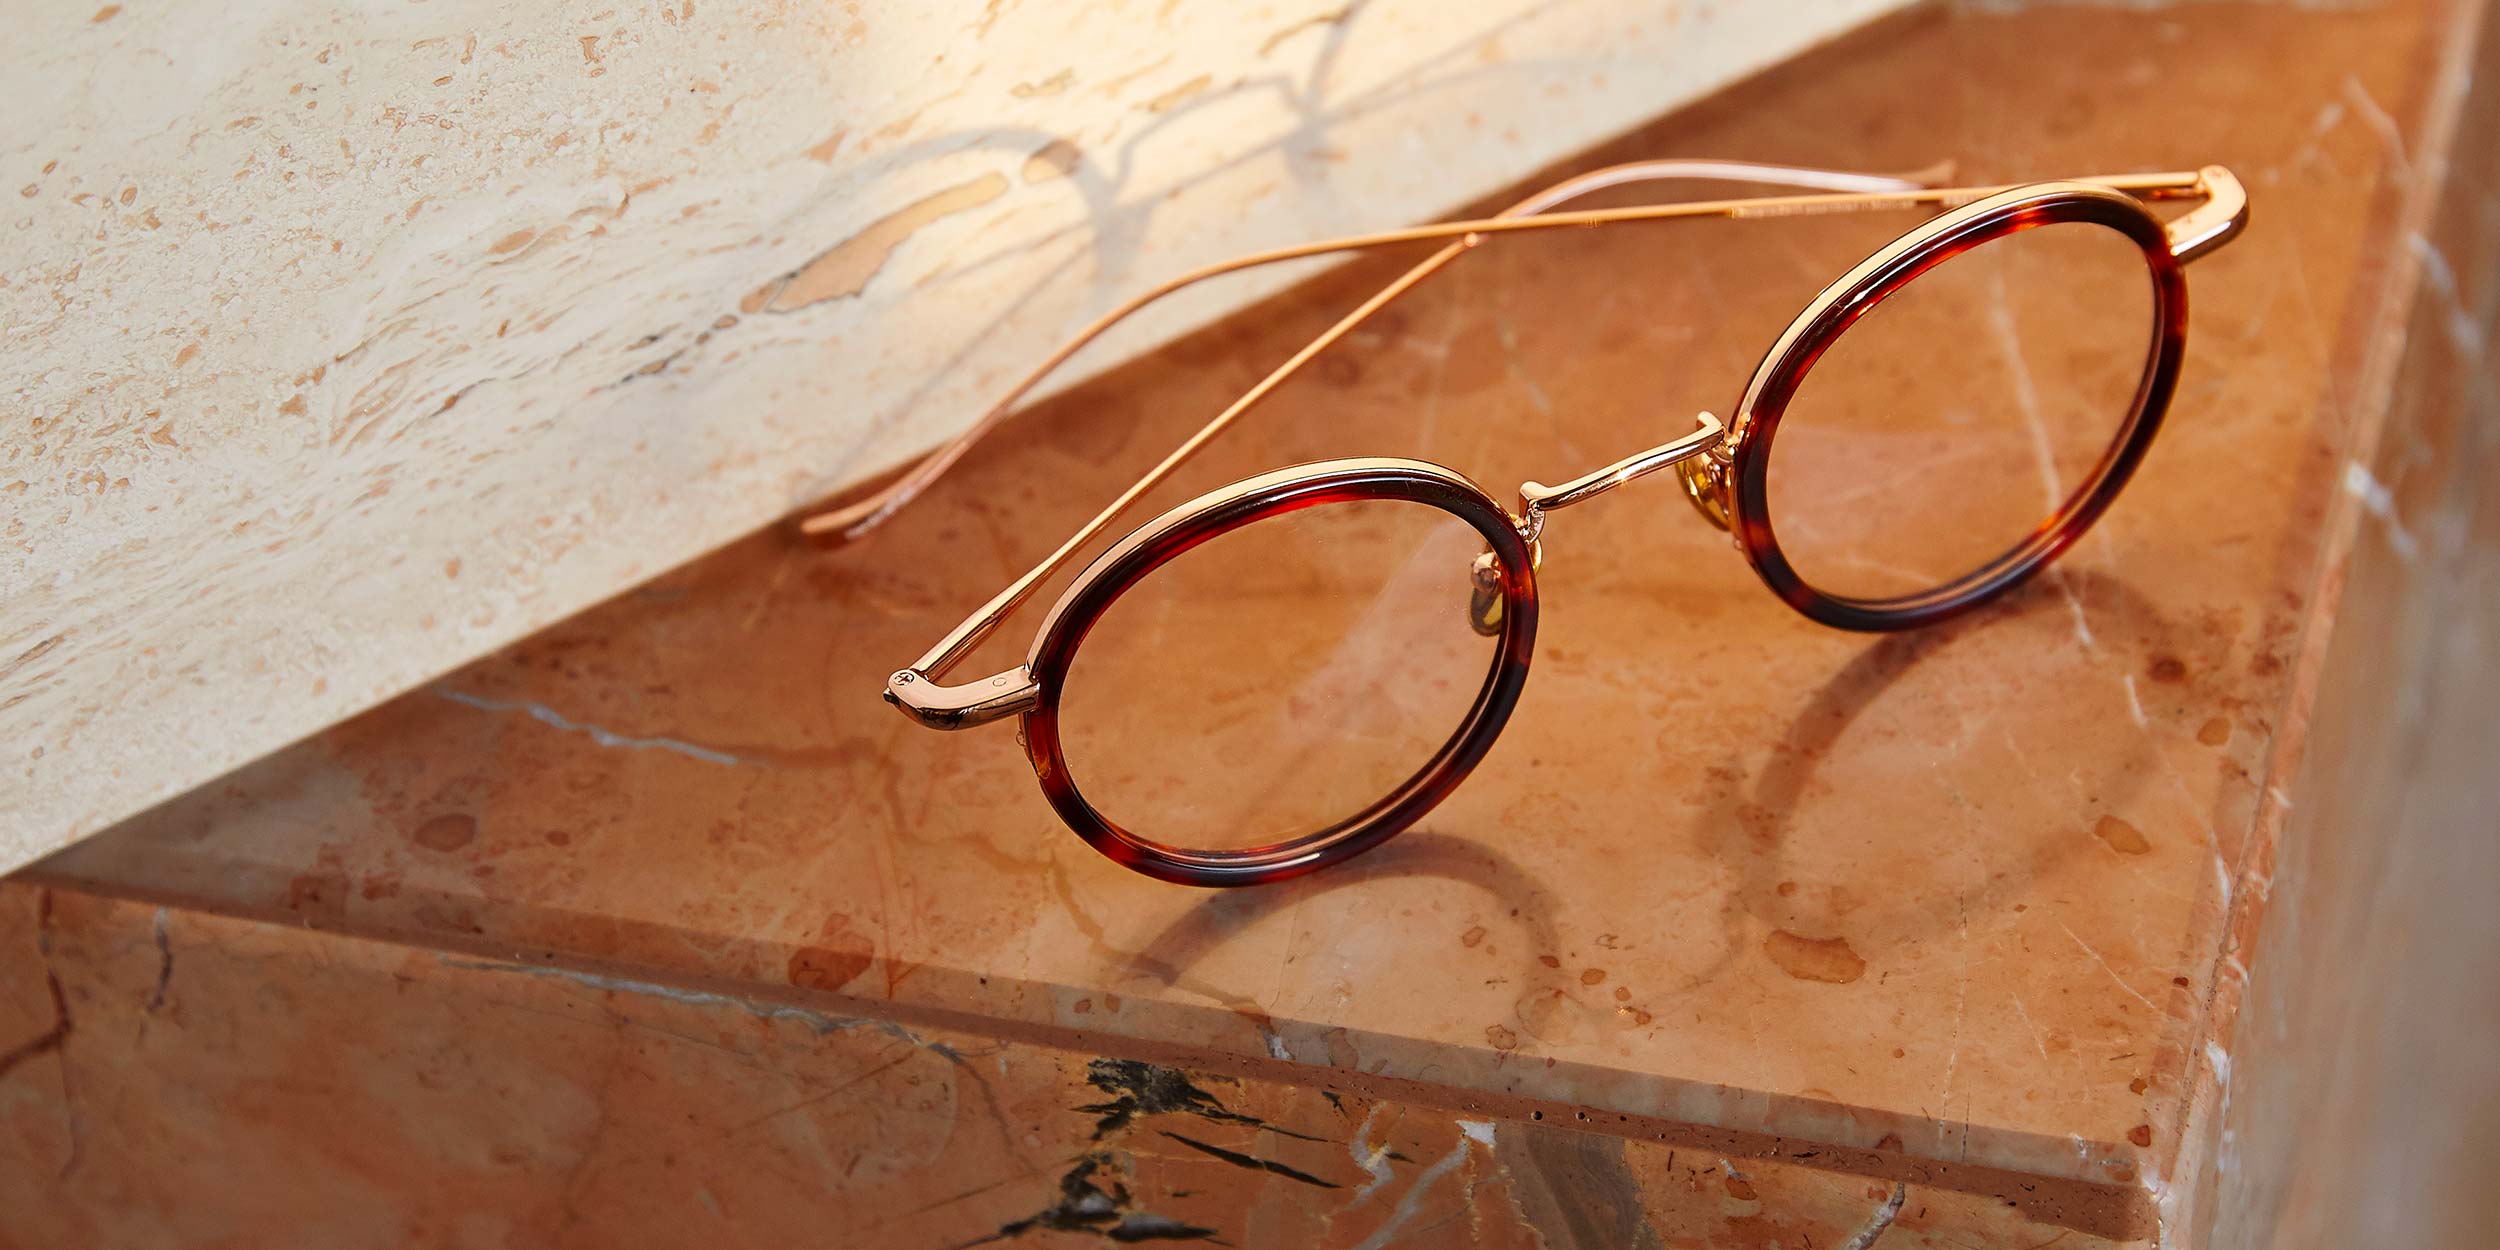 Photo Details of Nicolas Tortoise & Rose Gold Reading Glasses in a room